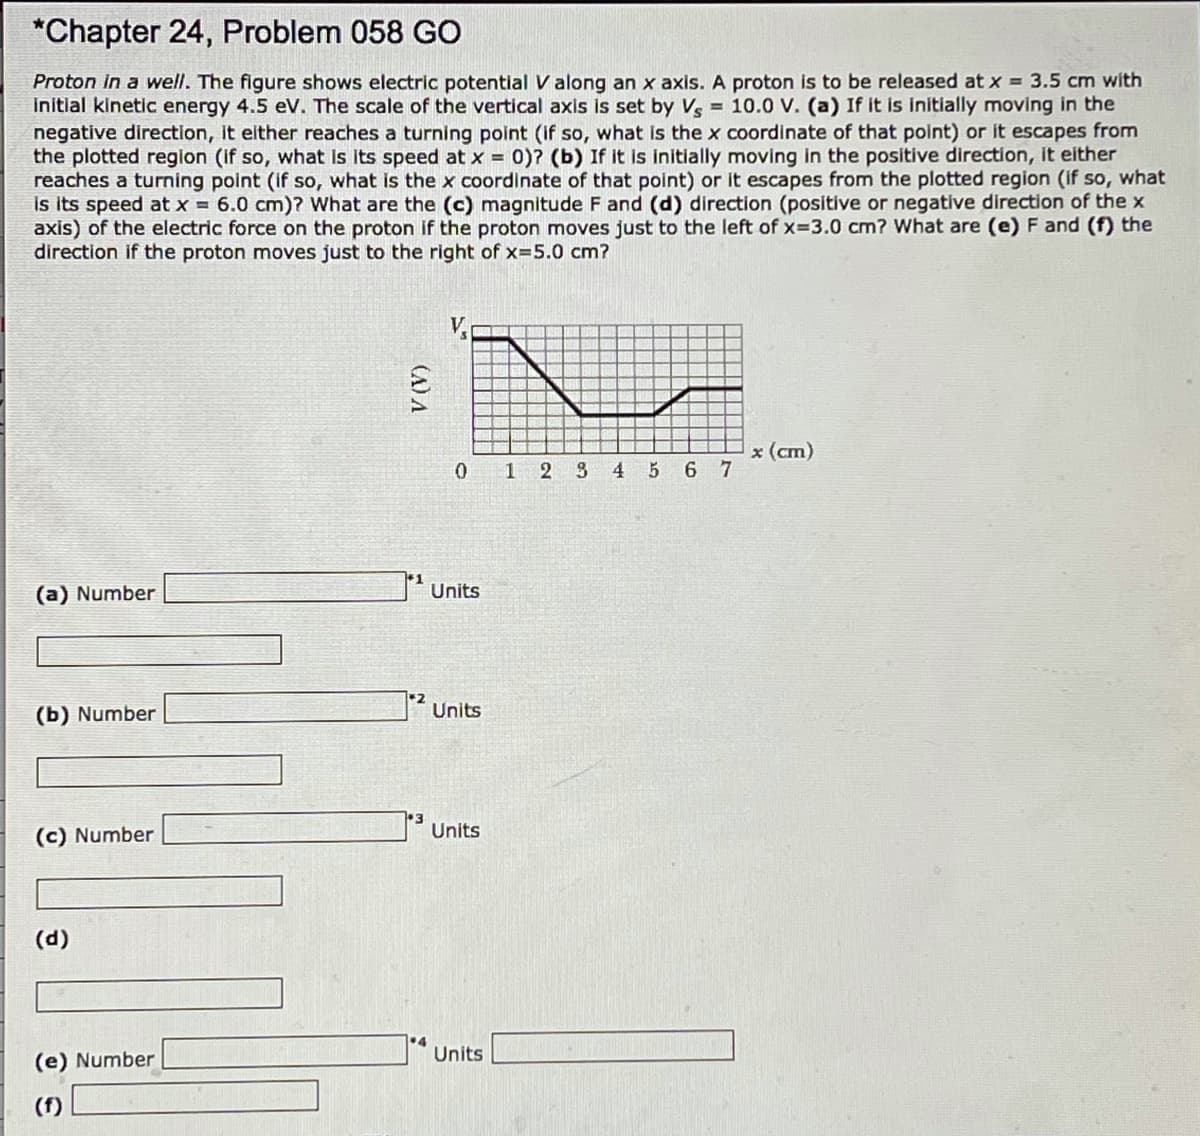 *Chapter 24, Problem 058 GO
Proton in a well. The figure shows electric potential V along an x axis. A proton is to be released at x = 3.5 cm with
initlal kinetic energy 4.5 eV. The scale of the vertical axis is set by V = 10.0 V. (a) If it is initially moving in the
negative directlon, It elther reaches a turning point (if so, what is the x coordinate of that point) or it escapes from
the plotted region (if so, what Is Its speed at x = 0)? (b) If it is initially moving in the positive direction, it either
reaches a turning point (if so, what is the x coordinate of that point) or it escapes from the plotted region (if so, what
is its speed at x = 6.0 cm)? What are the (c) magnitude F and (d) direction (positive or negative direction of the x
axis) of the electric force on the proton if the proton moves just to the left of x=3.0 cm? What are (e) F and (f) the
direction if the proton moves just to the right of x=5.0 cm?
V.
x (cm)
0 1 2 S
4.
6 7
(a) Number
Units
(b) Number
Units
Units
(c) Number
(d)
•4
Units
(e) Number
(f)
(A) A
